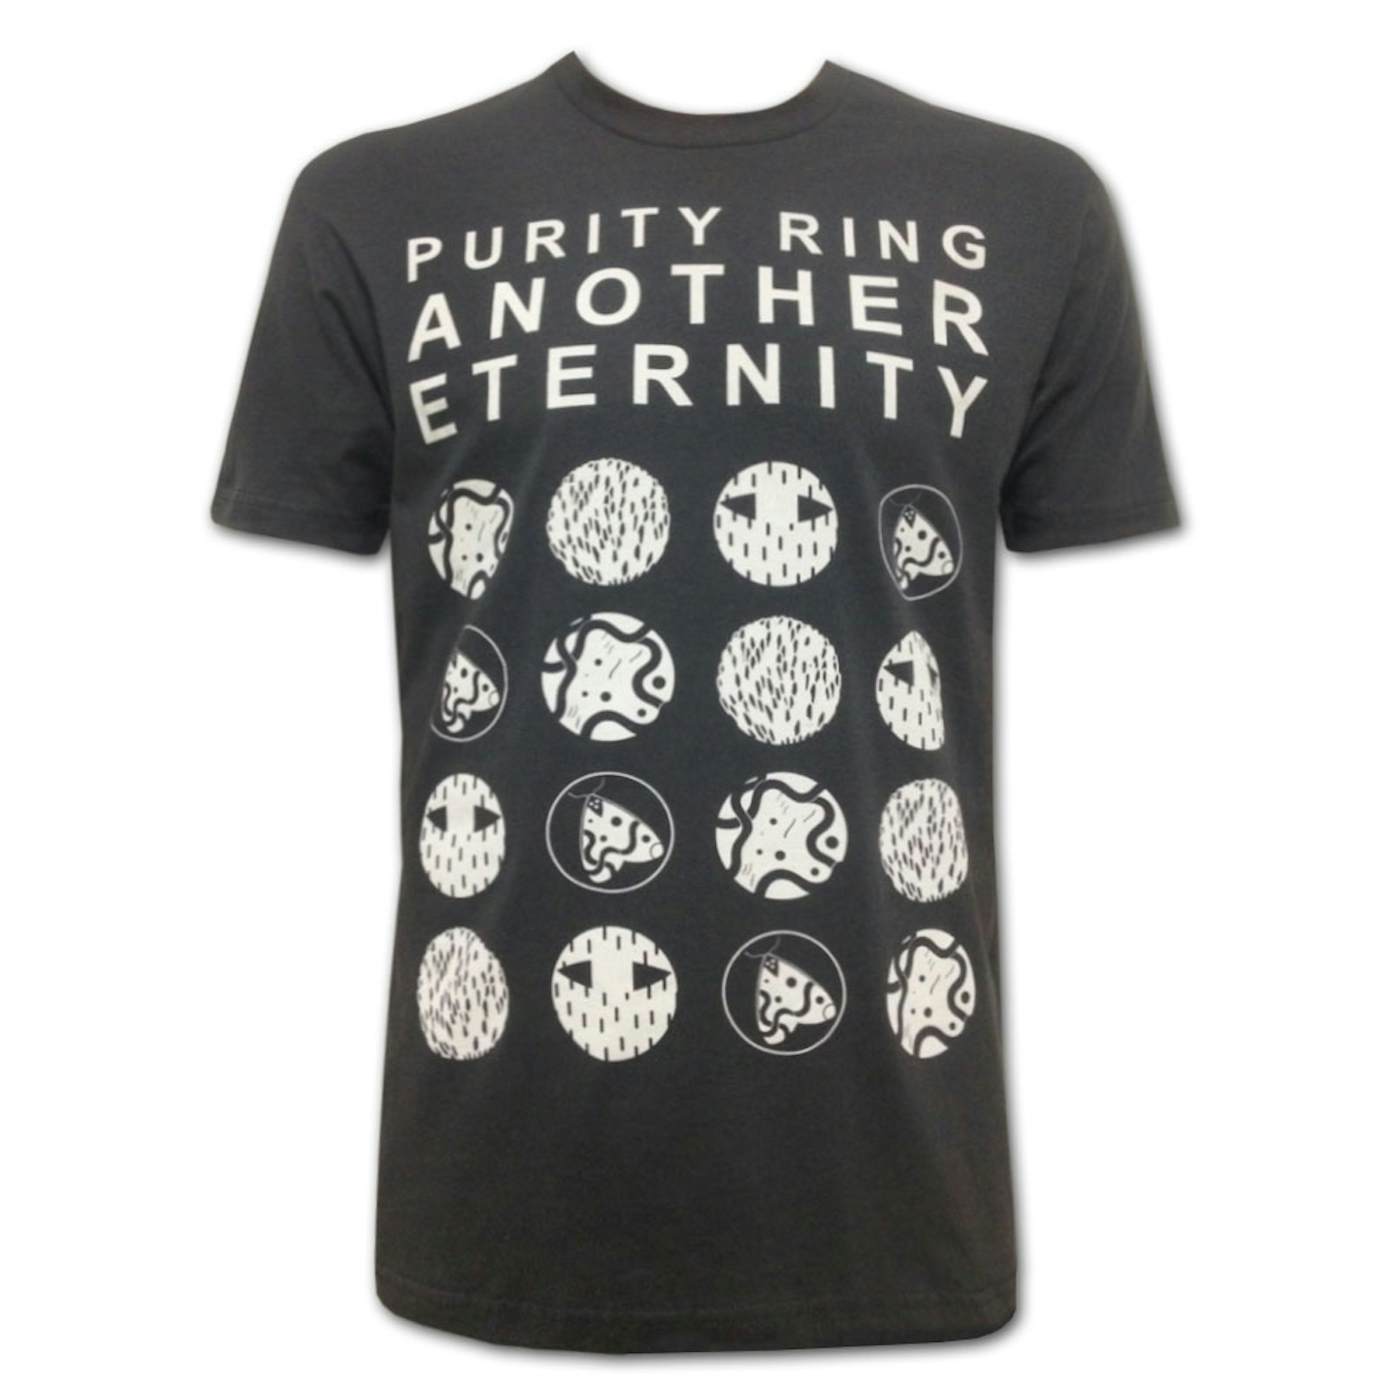 Purity Ring White Print Another Eternity T-Shirt